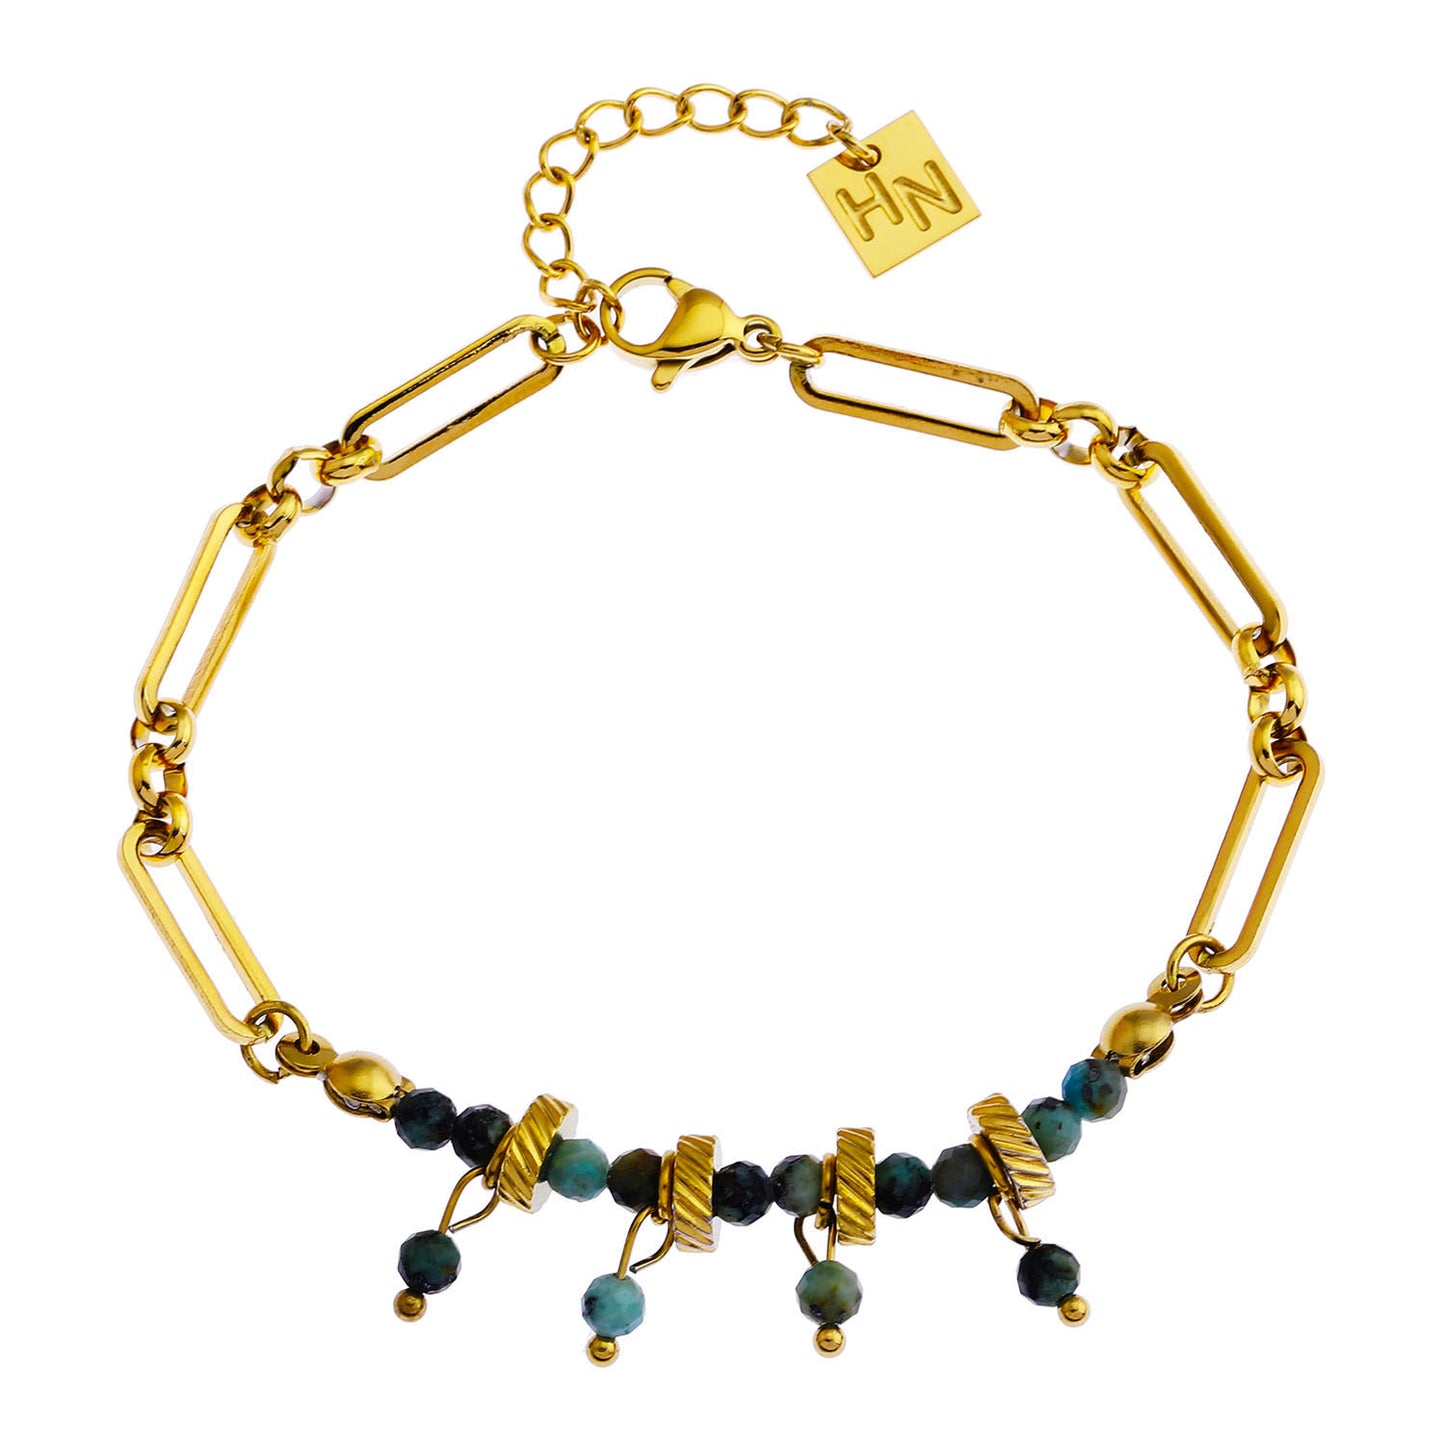 african-turquoise-bracelet | natural-stone-jewellery | hackney-nine | hackneynine | necklace | hoops | bracelets | earrings | charms | studs_earrings | jewellery | jewellery-store | shop-jewelry | gold-jewellery | silver-jewellery | dressy_jewellery | classy_ jewellery | on_trend_jewellery | fashion_ jewellery | cool_jewellery | affordable_jewellery | designer_jewellery | vintage_jeweler | gifts-for-her | gifts-for-mum | gifts-for-girls | gifts-for-females | dainty-jewellery | bridesmaid-gift 